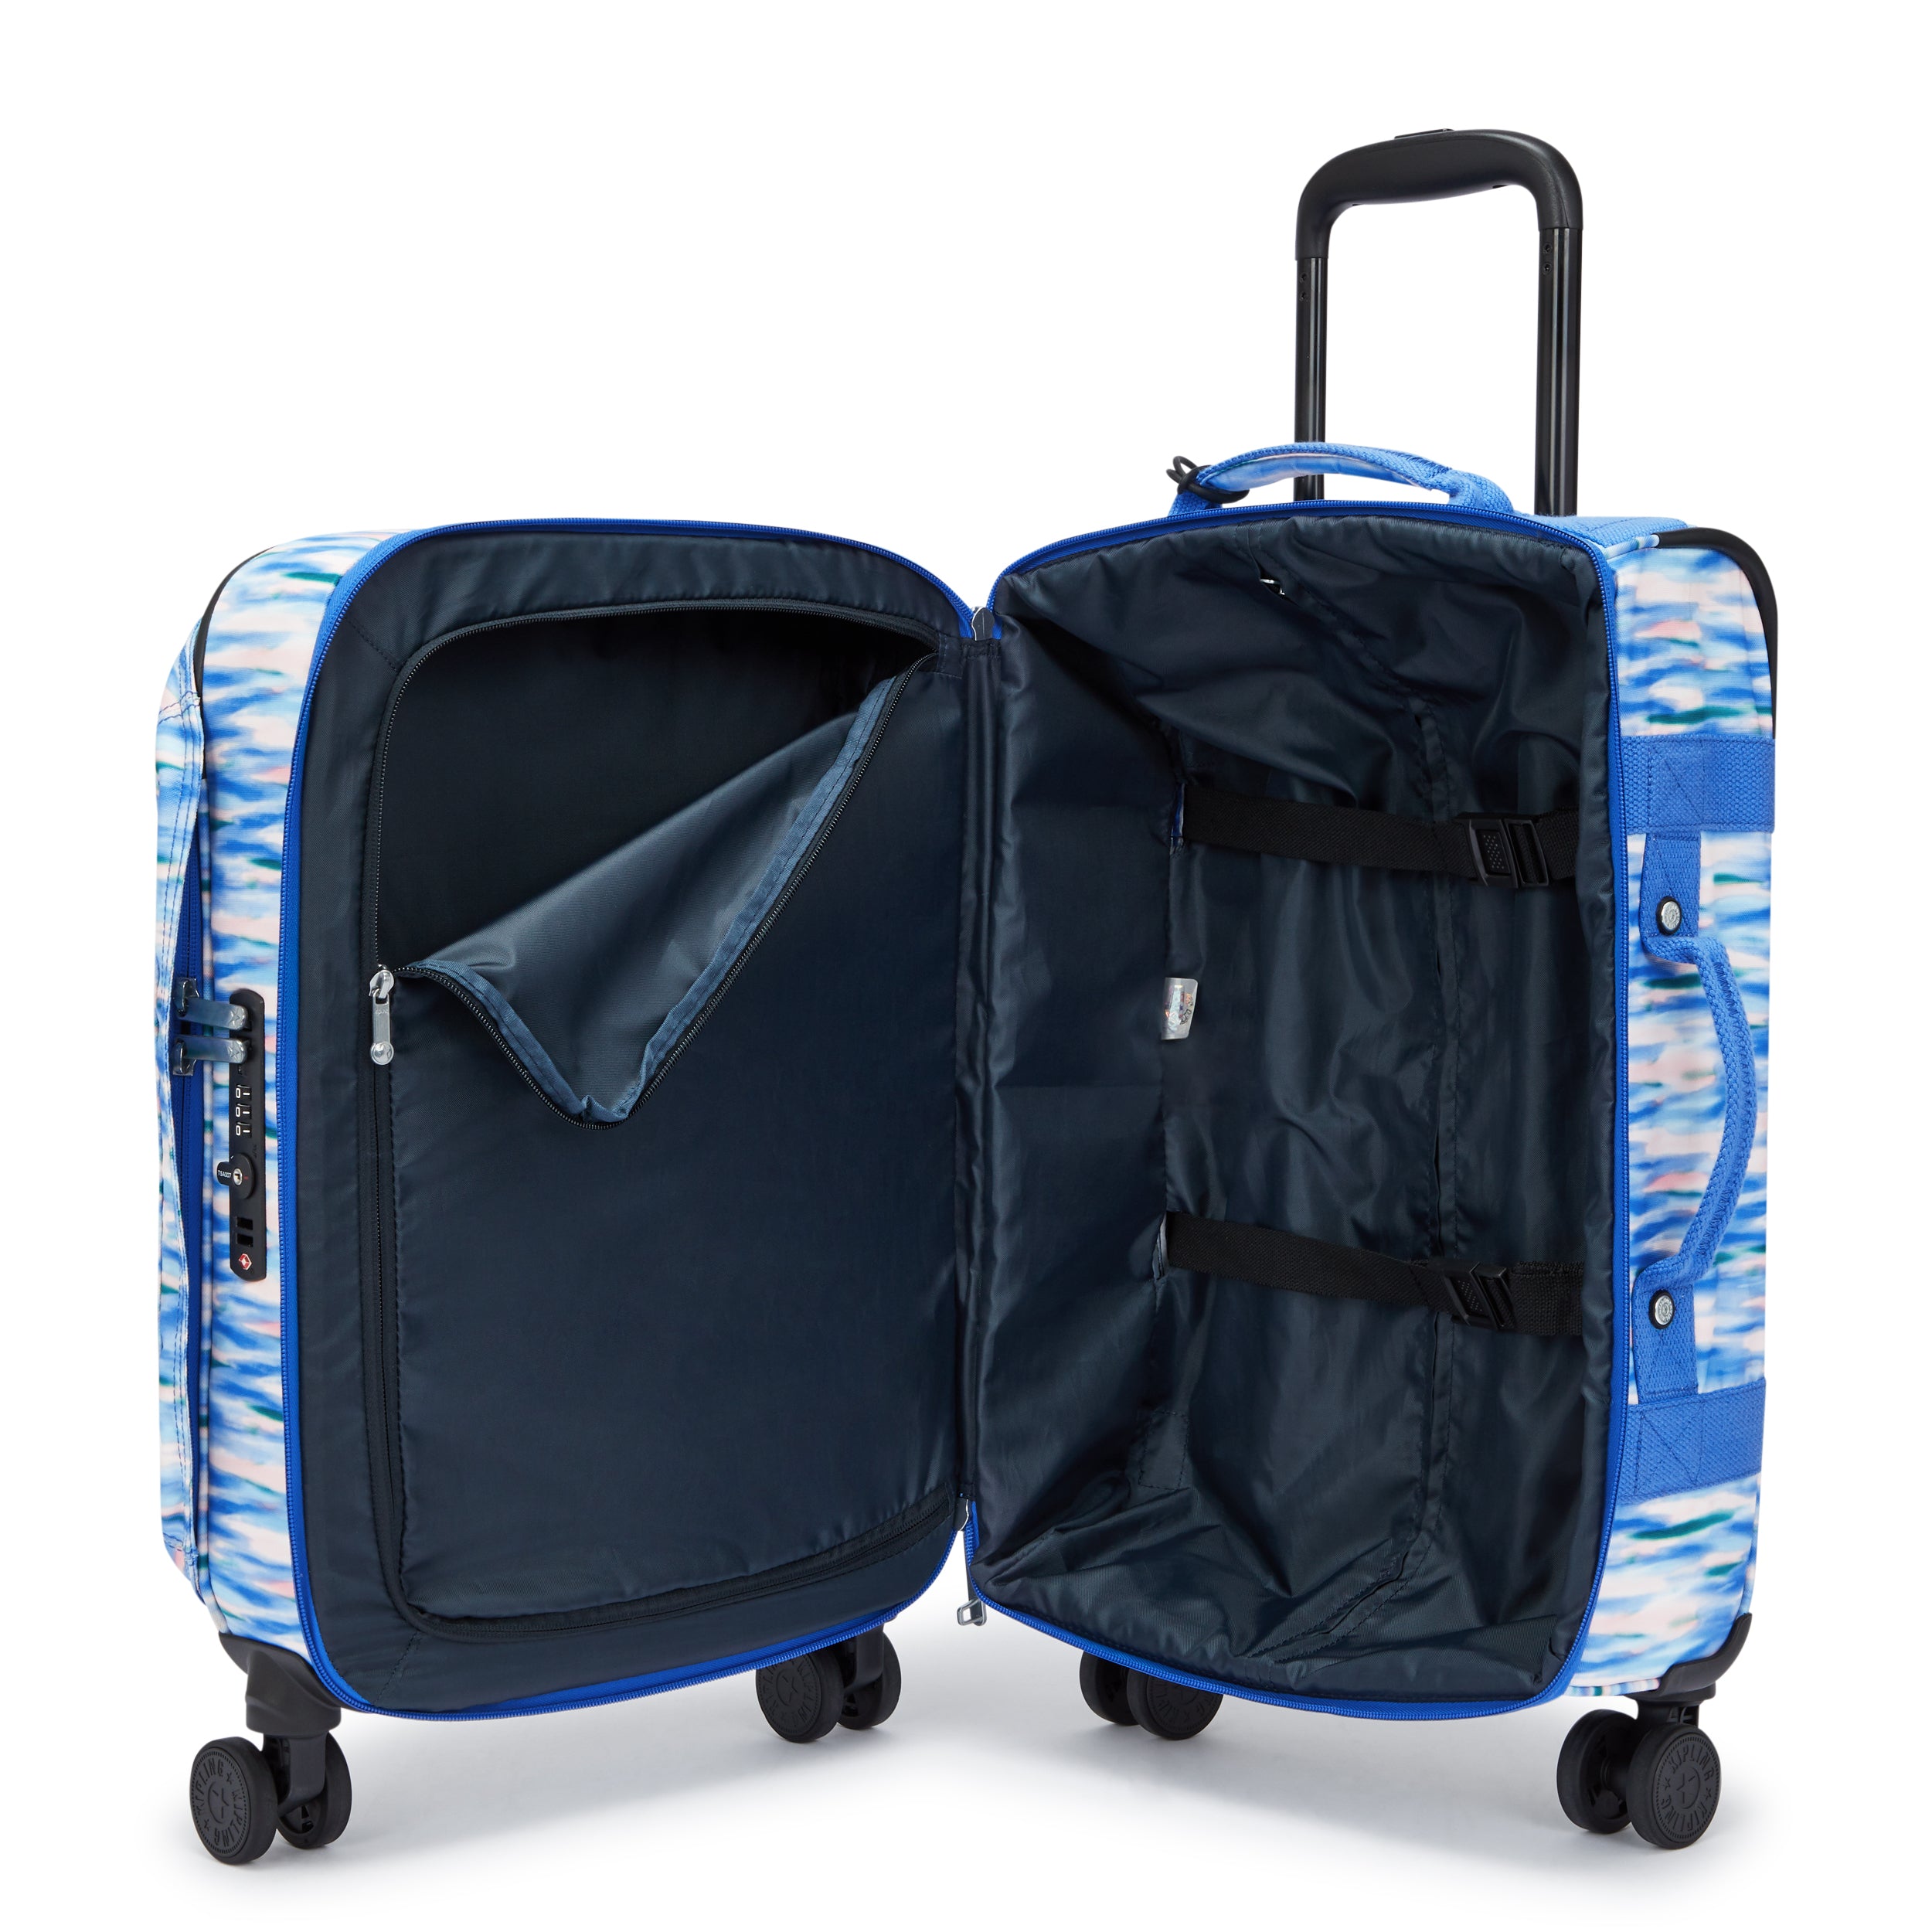 KIPLING-Spontaneous S-Small cabin size wheeled luggage-Diluted Blue-I7211-TX9